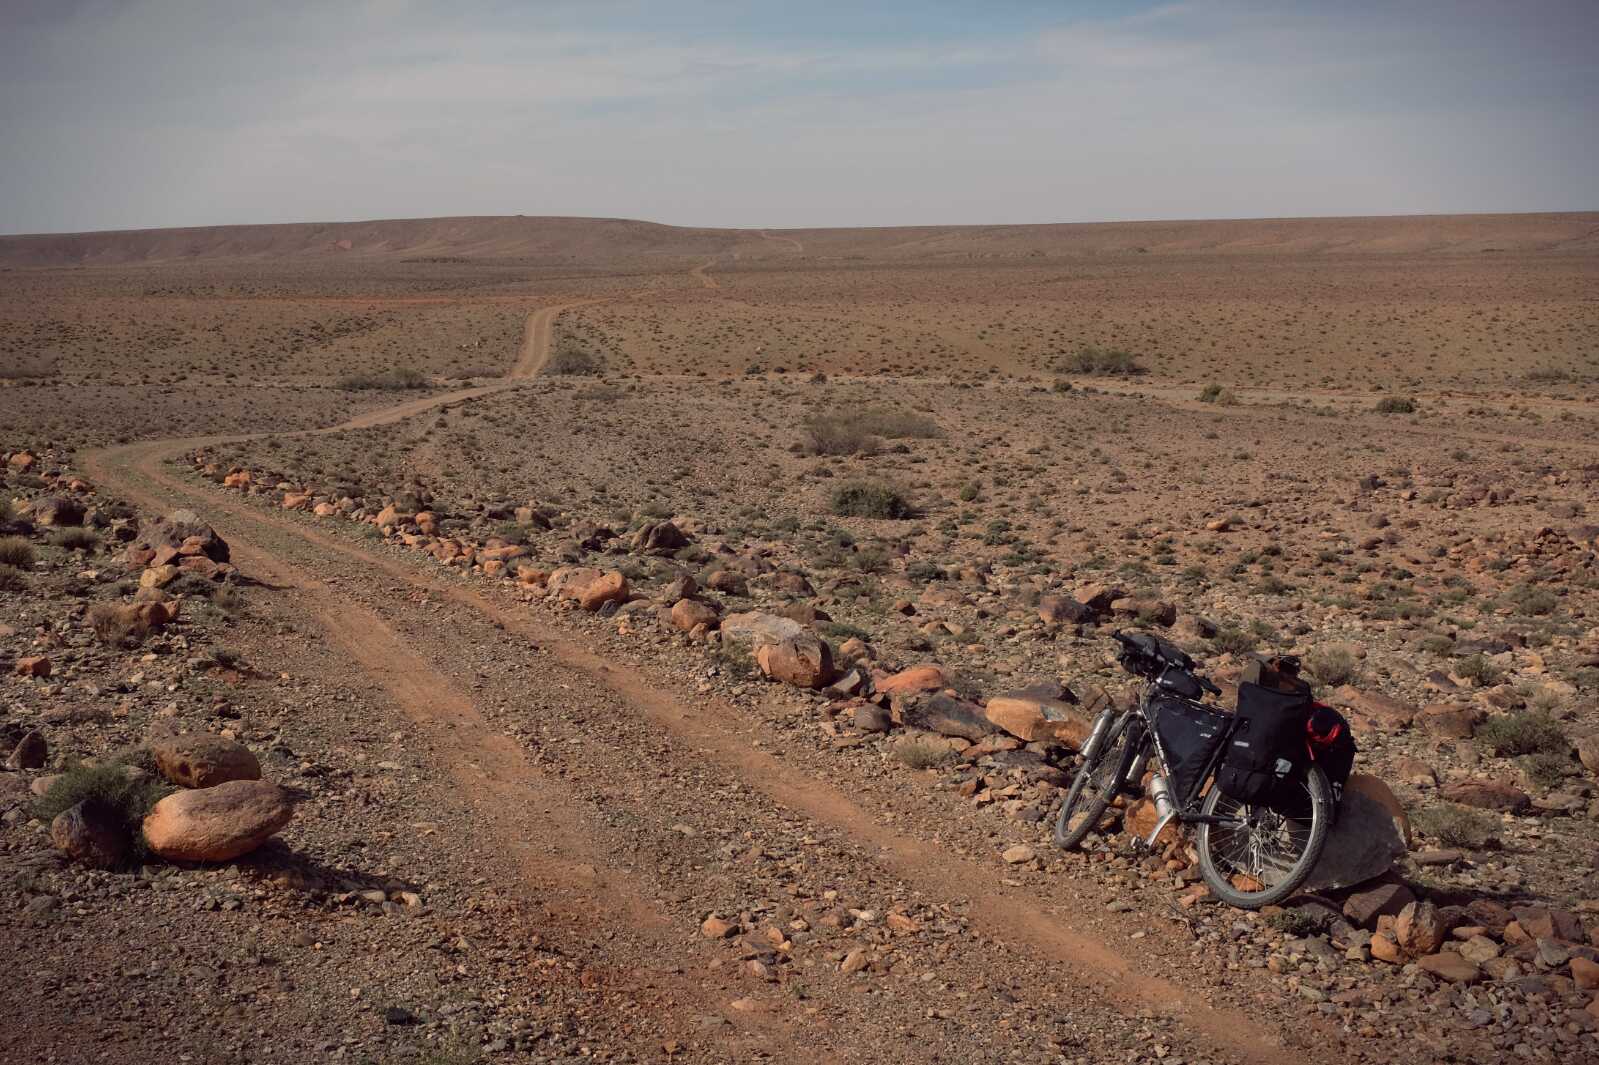 '..take the track that goes west and stay on it until you reach the asphalt road that goes from Skoura to Demnate.'